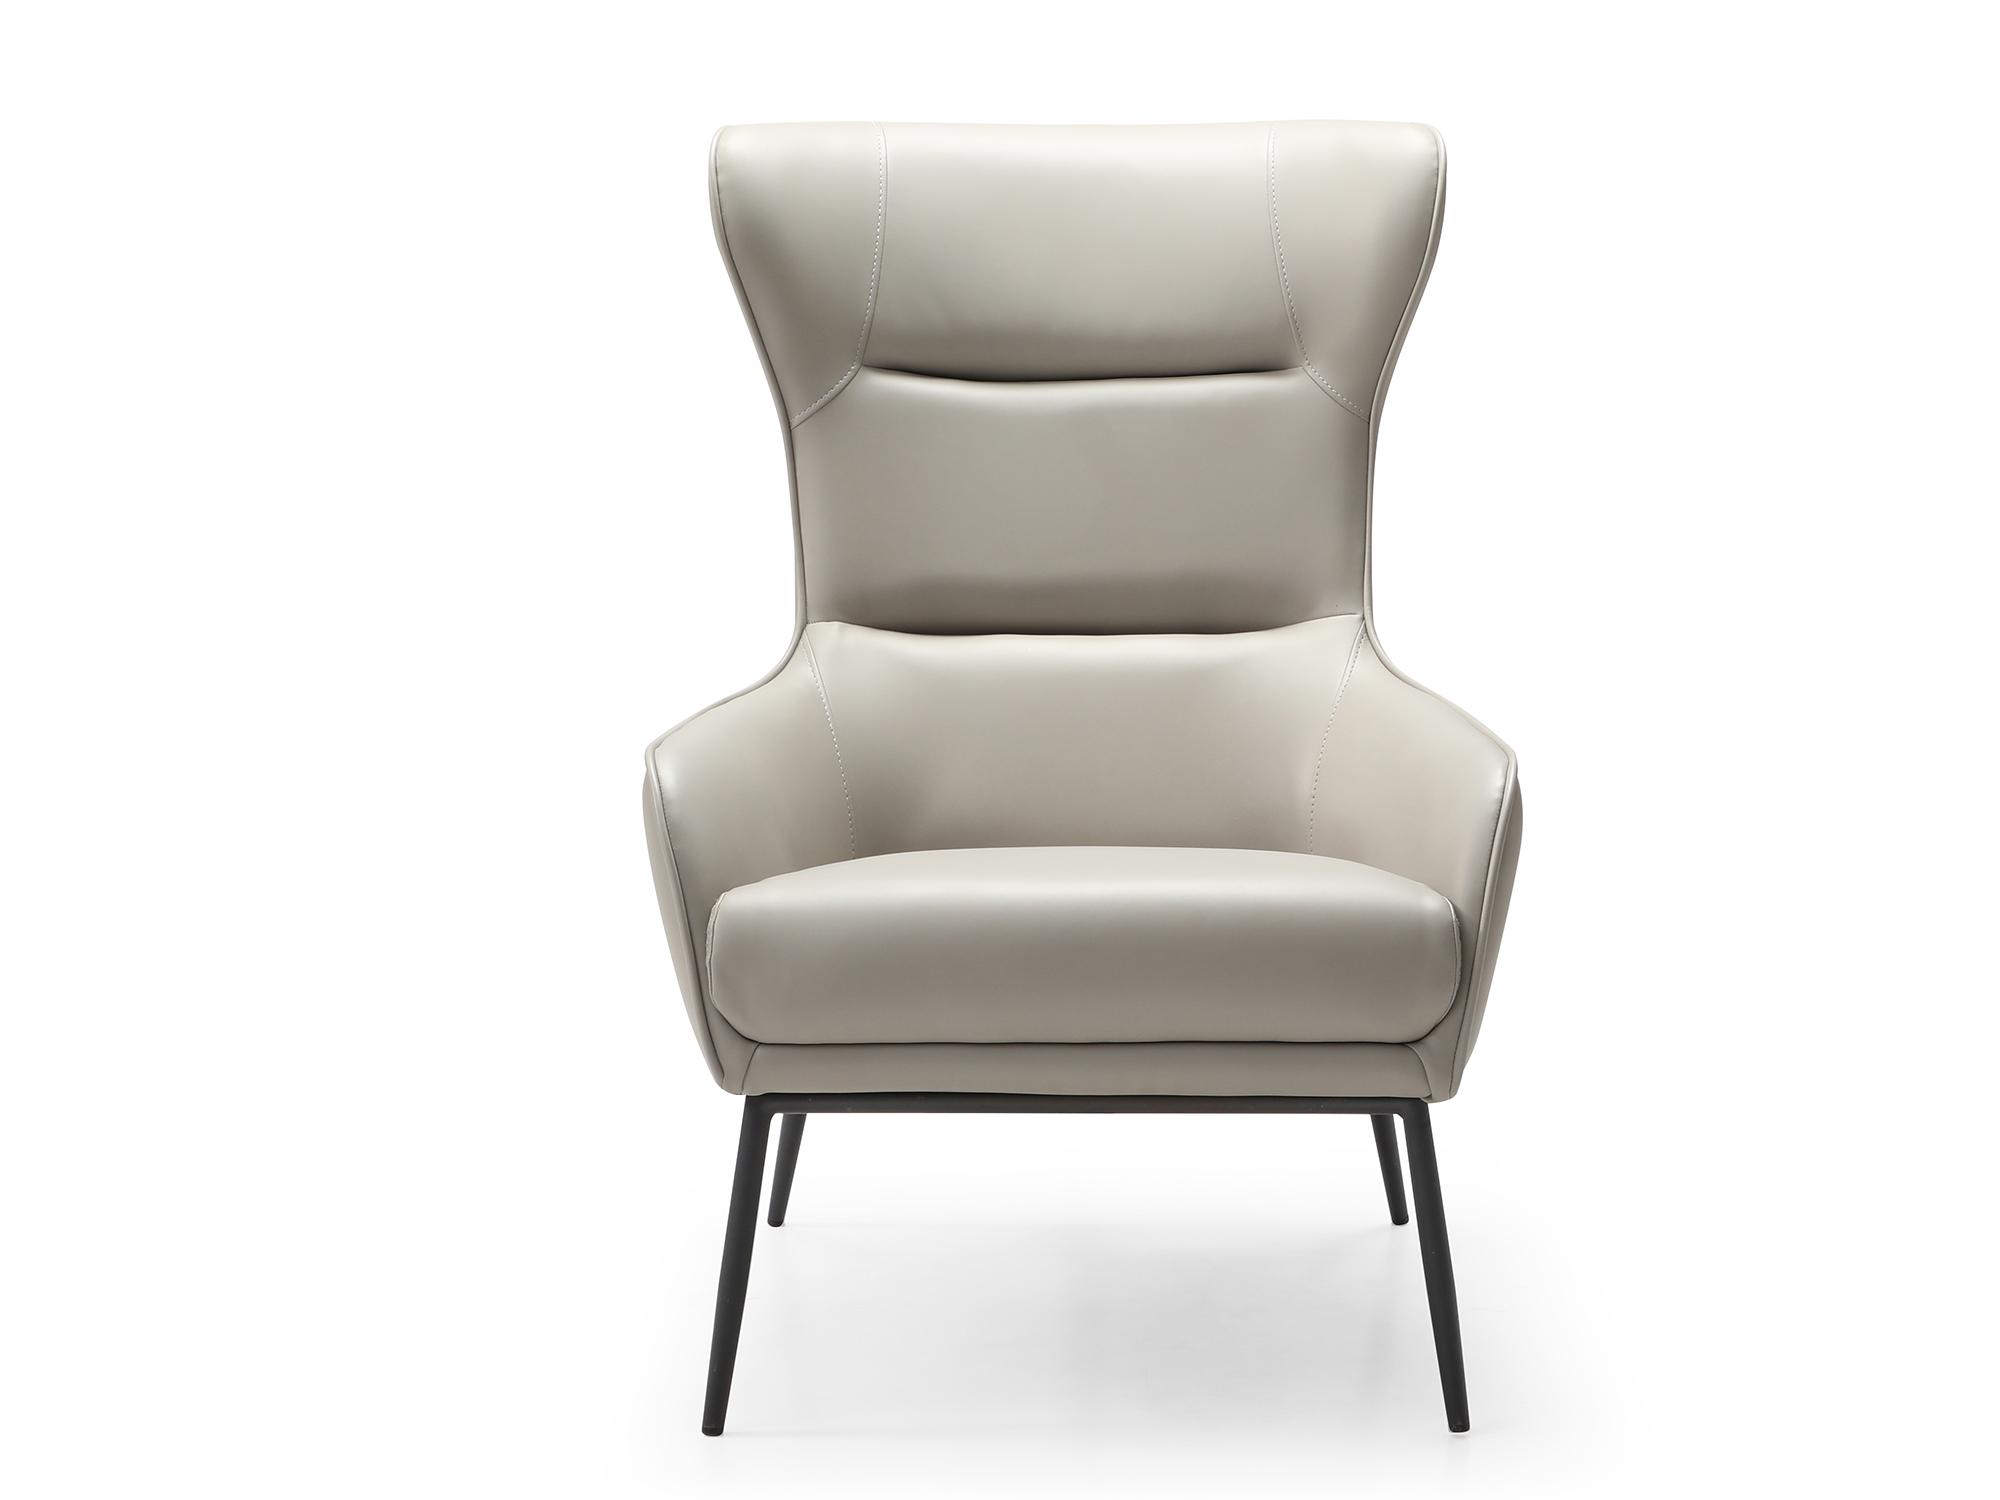 Contemporary Accent Chair CH1707P-LGRY Wyatt CH1707P-LGRY in Light Gray Fabric